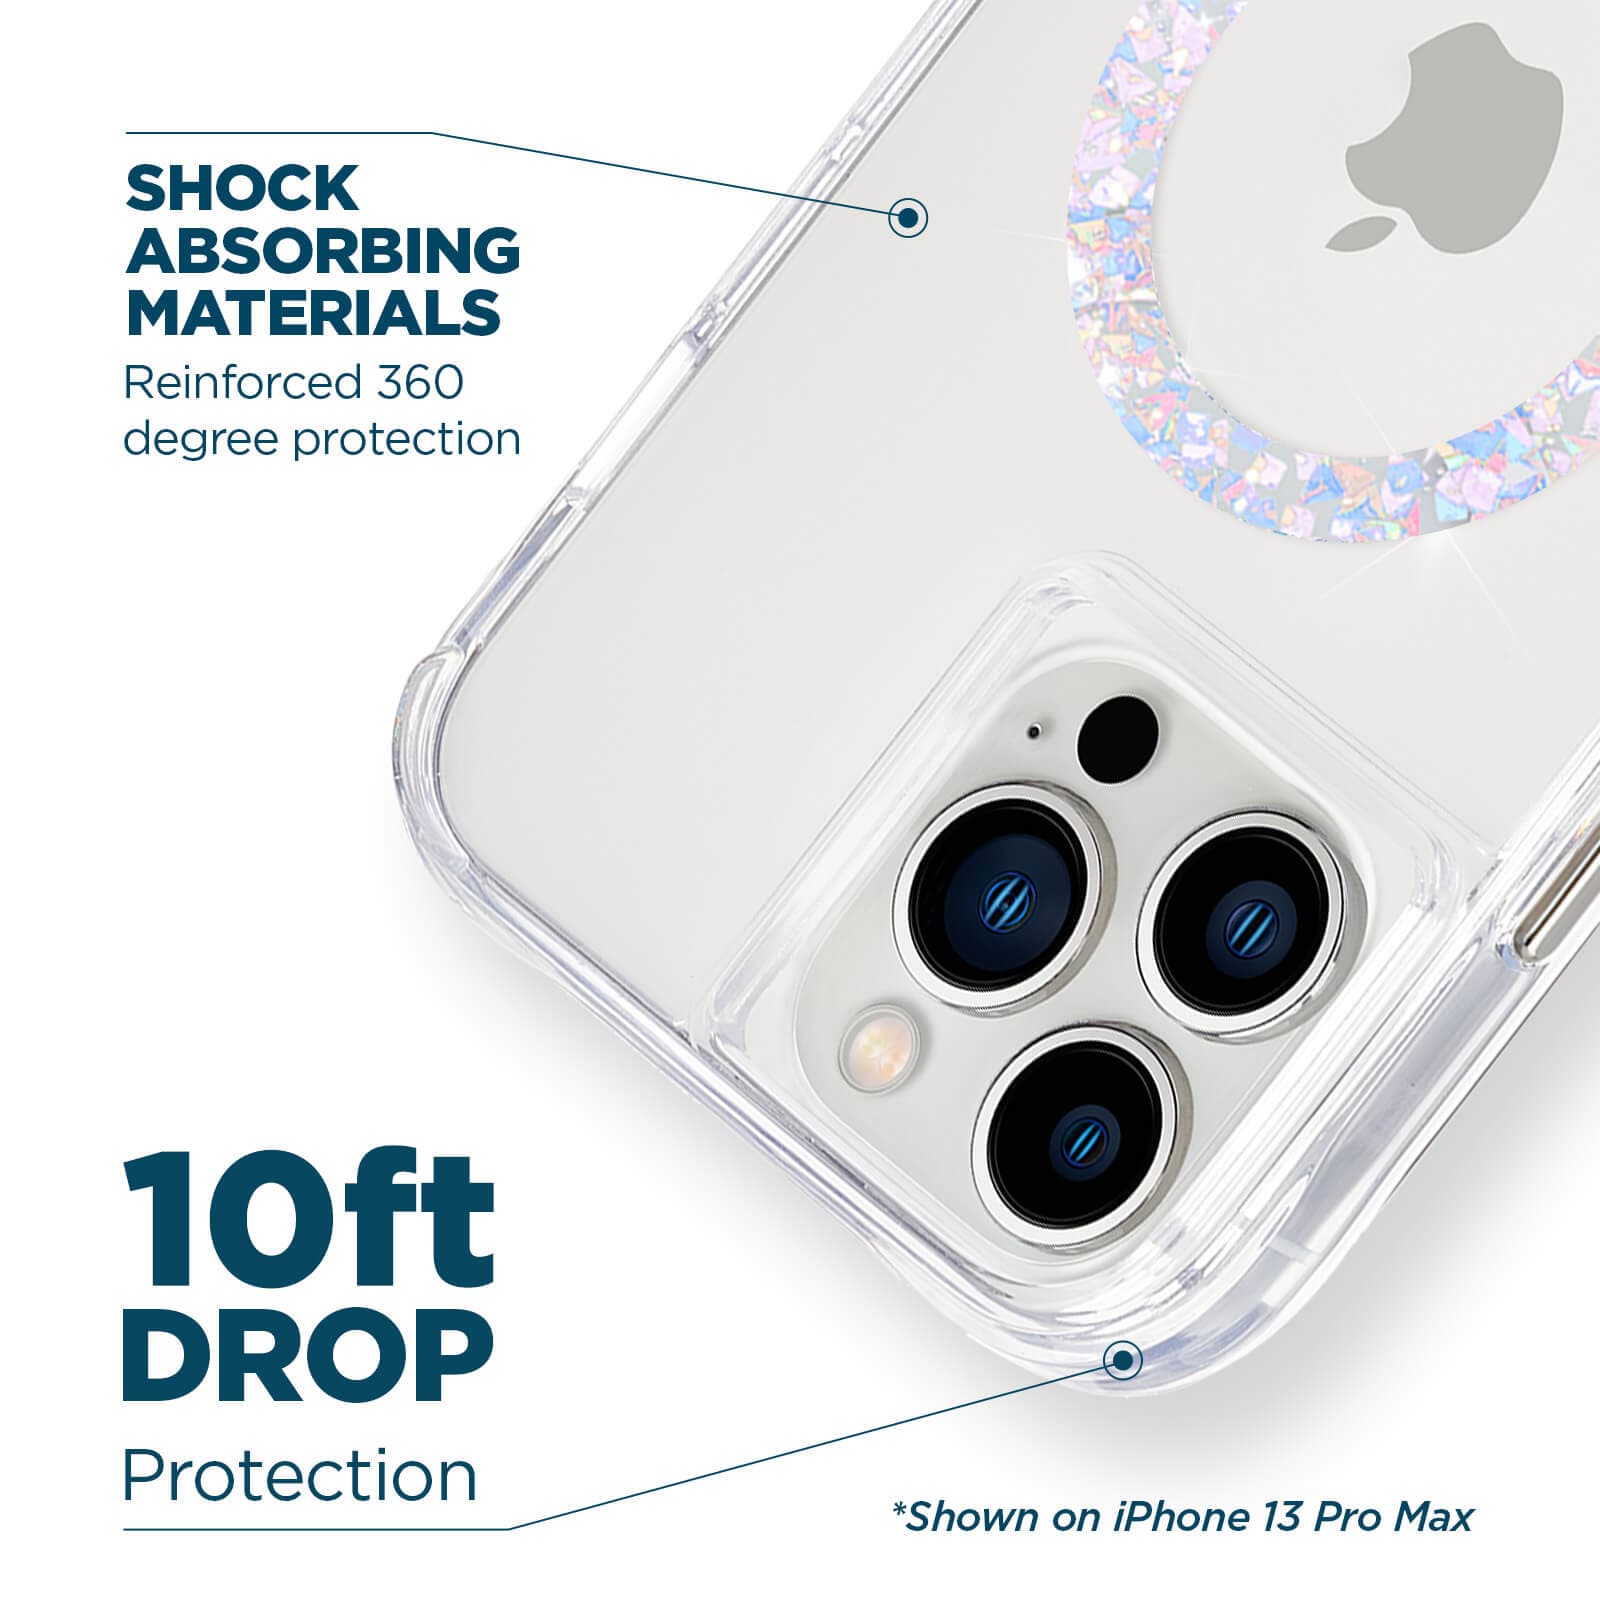 Shock absorbing materials reinforced degree protection. 10ft drop protection. shown on iPhone 13 pro max. color::Twinkle Diamond